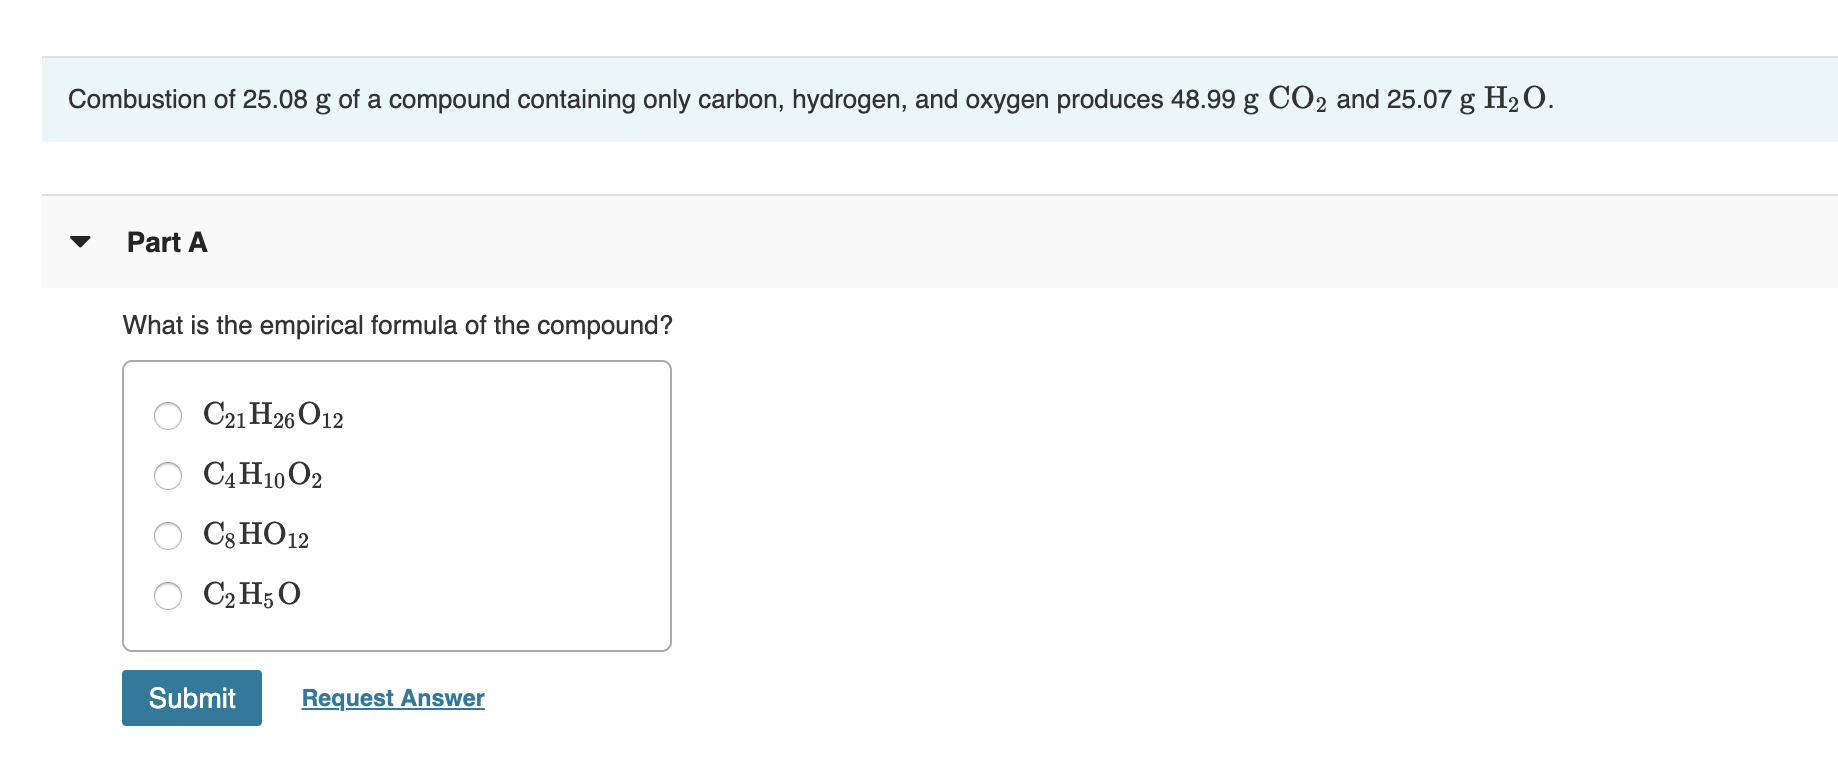 Combustion of 25.08 g of a compound containing only carbon, hydrogen, and oxygen produces 48.99 g CO2 and 25.07 g H2O
Part A
What is the empirical formula of the compound?
C21 H26 O12
САН10 02
C8 HO12
СрH5О
Submit
Request Answer
